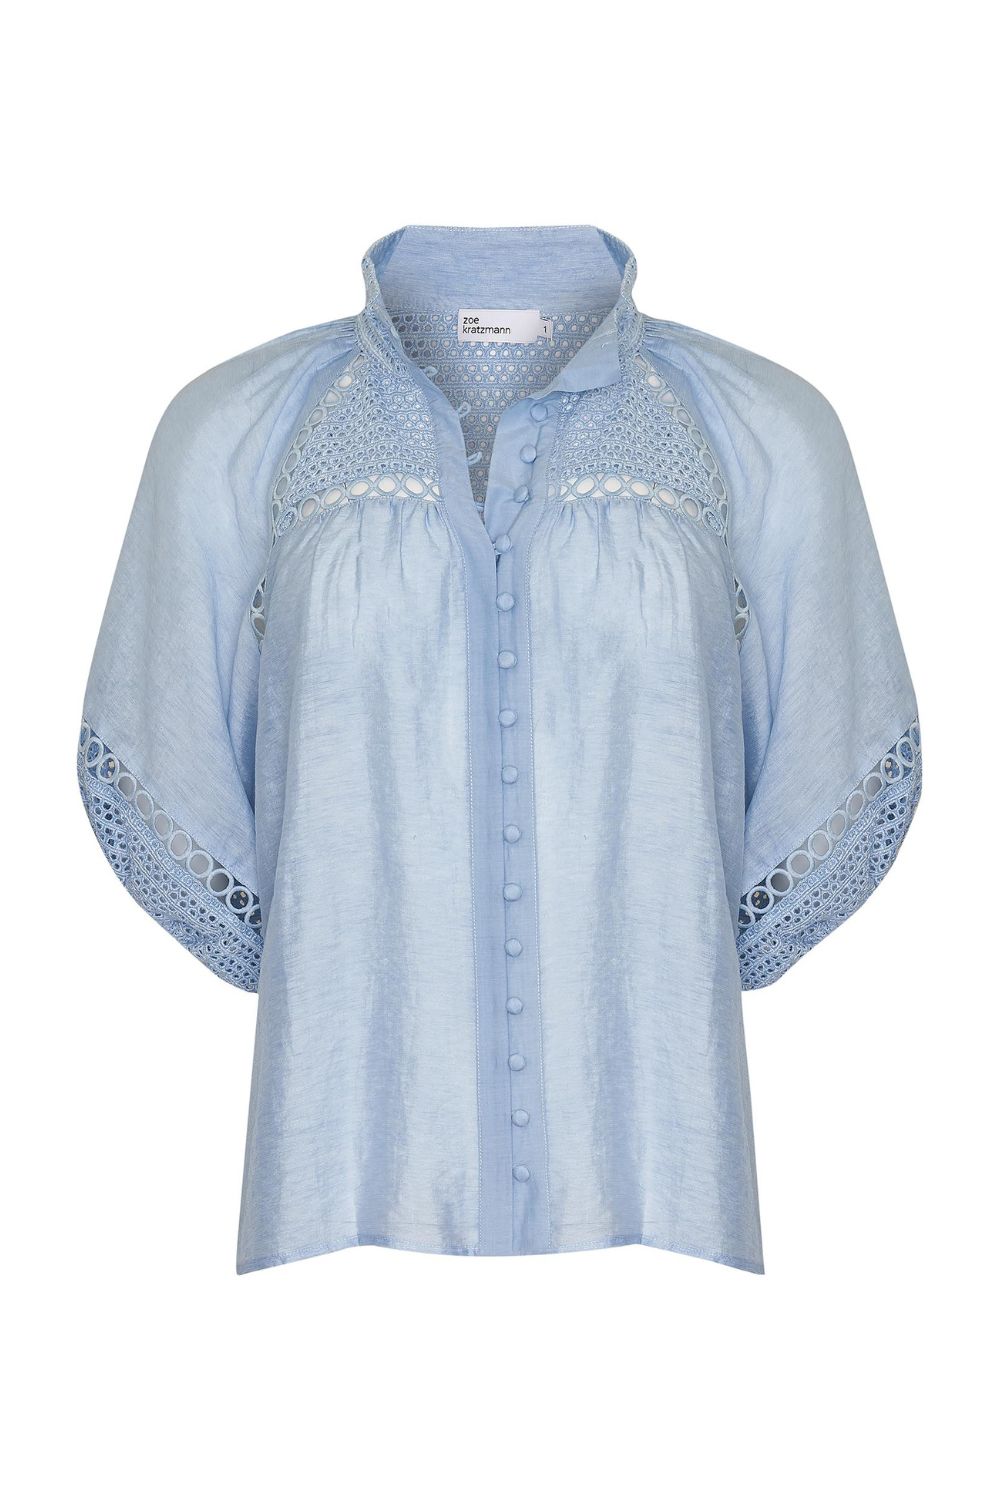 blue, top, high neck, mid-length sleeve, covered buttons, circular lace detailing, product image